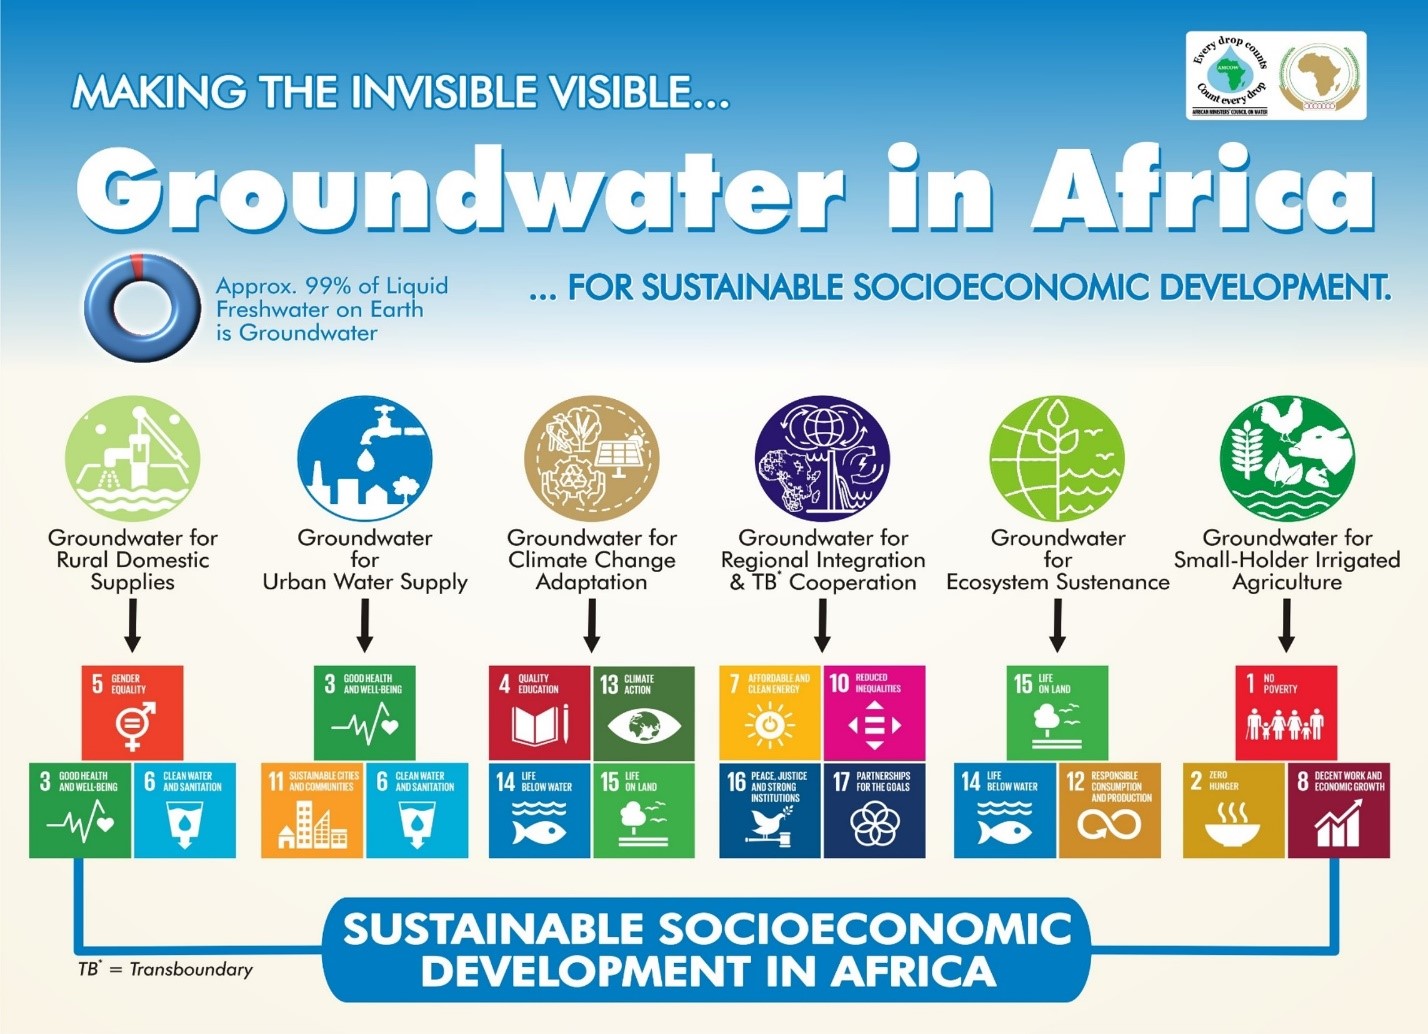 Role of groundwater in Africa’s socioeconomic development 